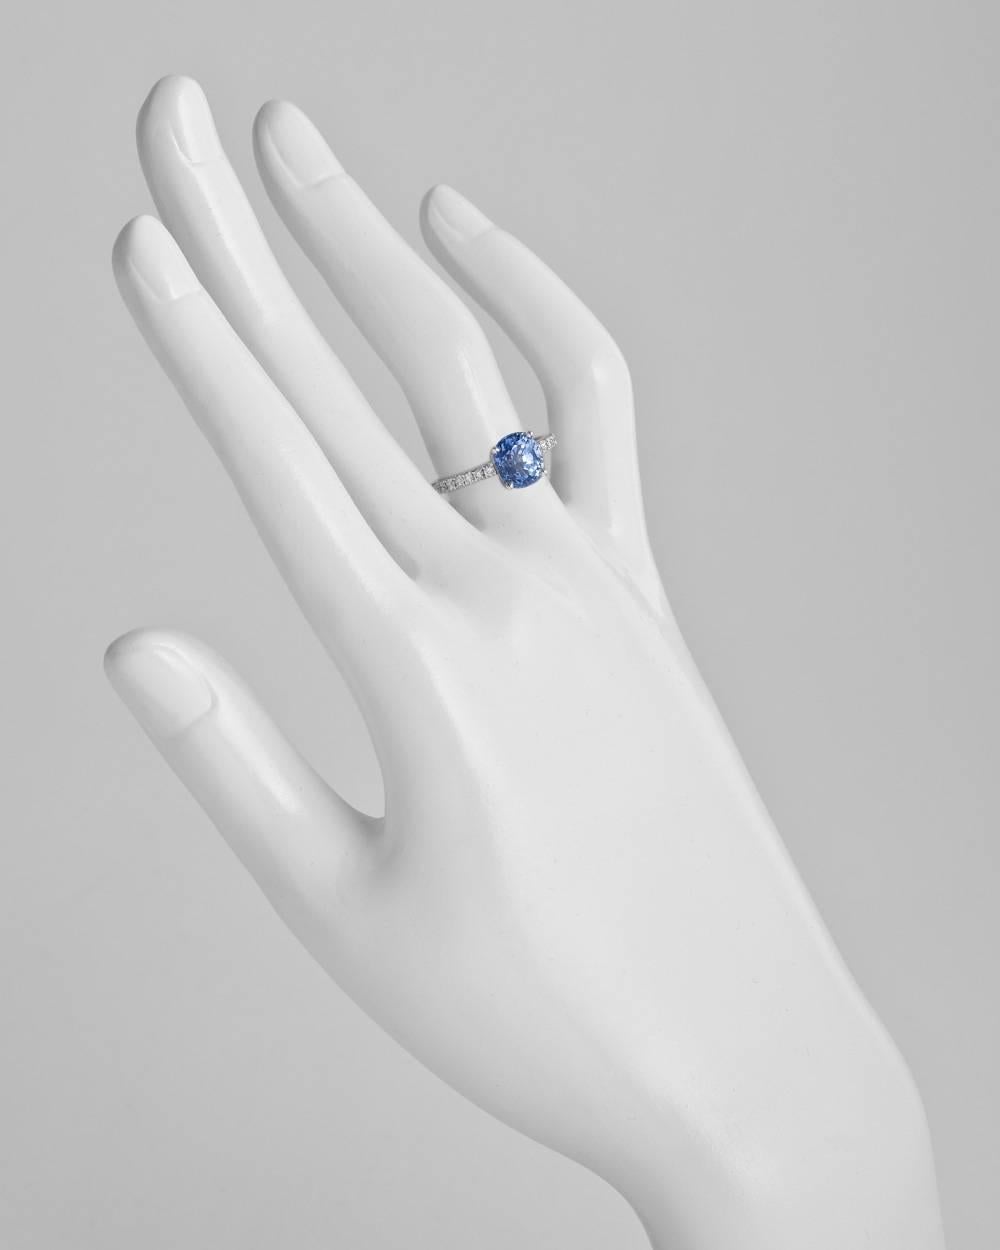 Sapphire ring, centering an oval cut sapphire weighing 2.00 carats, with bead-set diamond shoulders, the fourteen diamond accents weighing approximately 0.30 total carats, mounted in 18k white gold. Size 6 (resizable to most ring sizes).